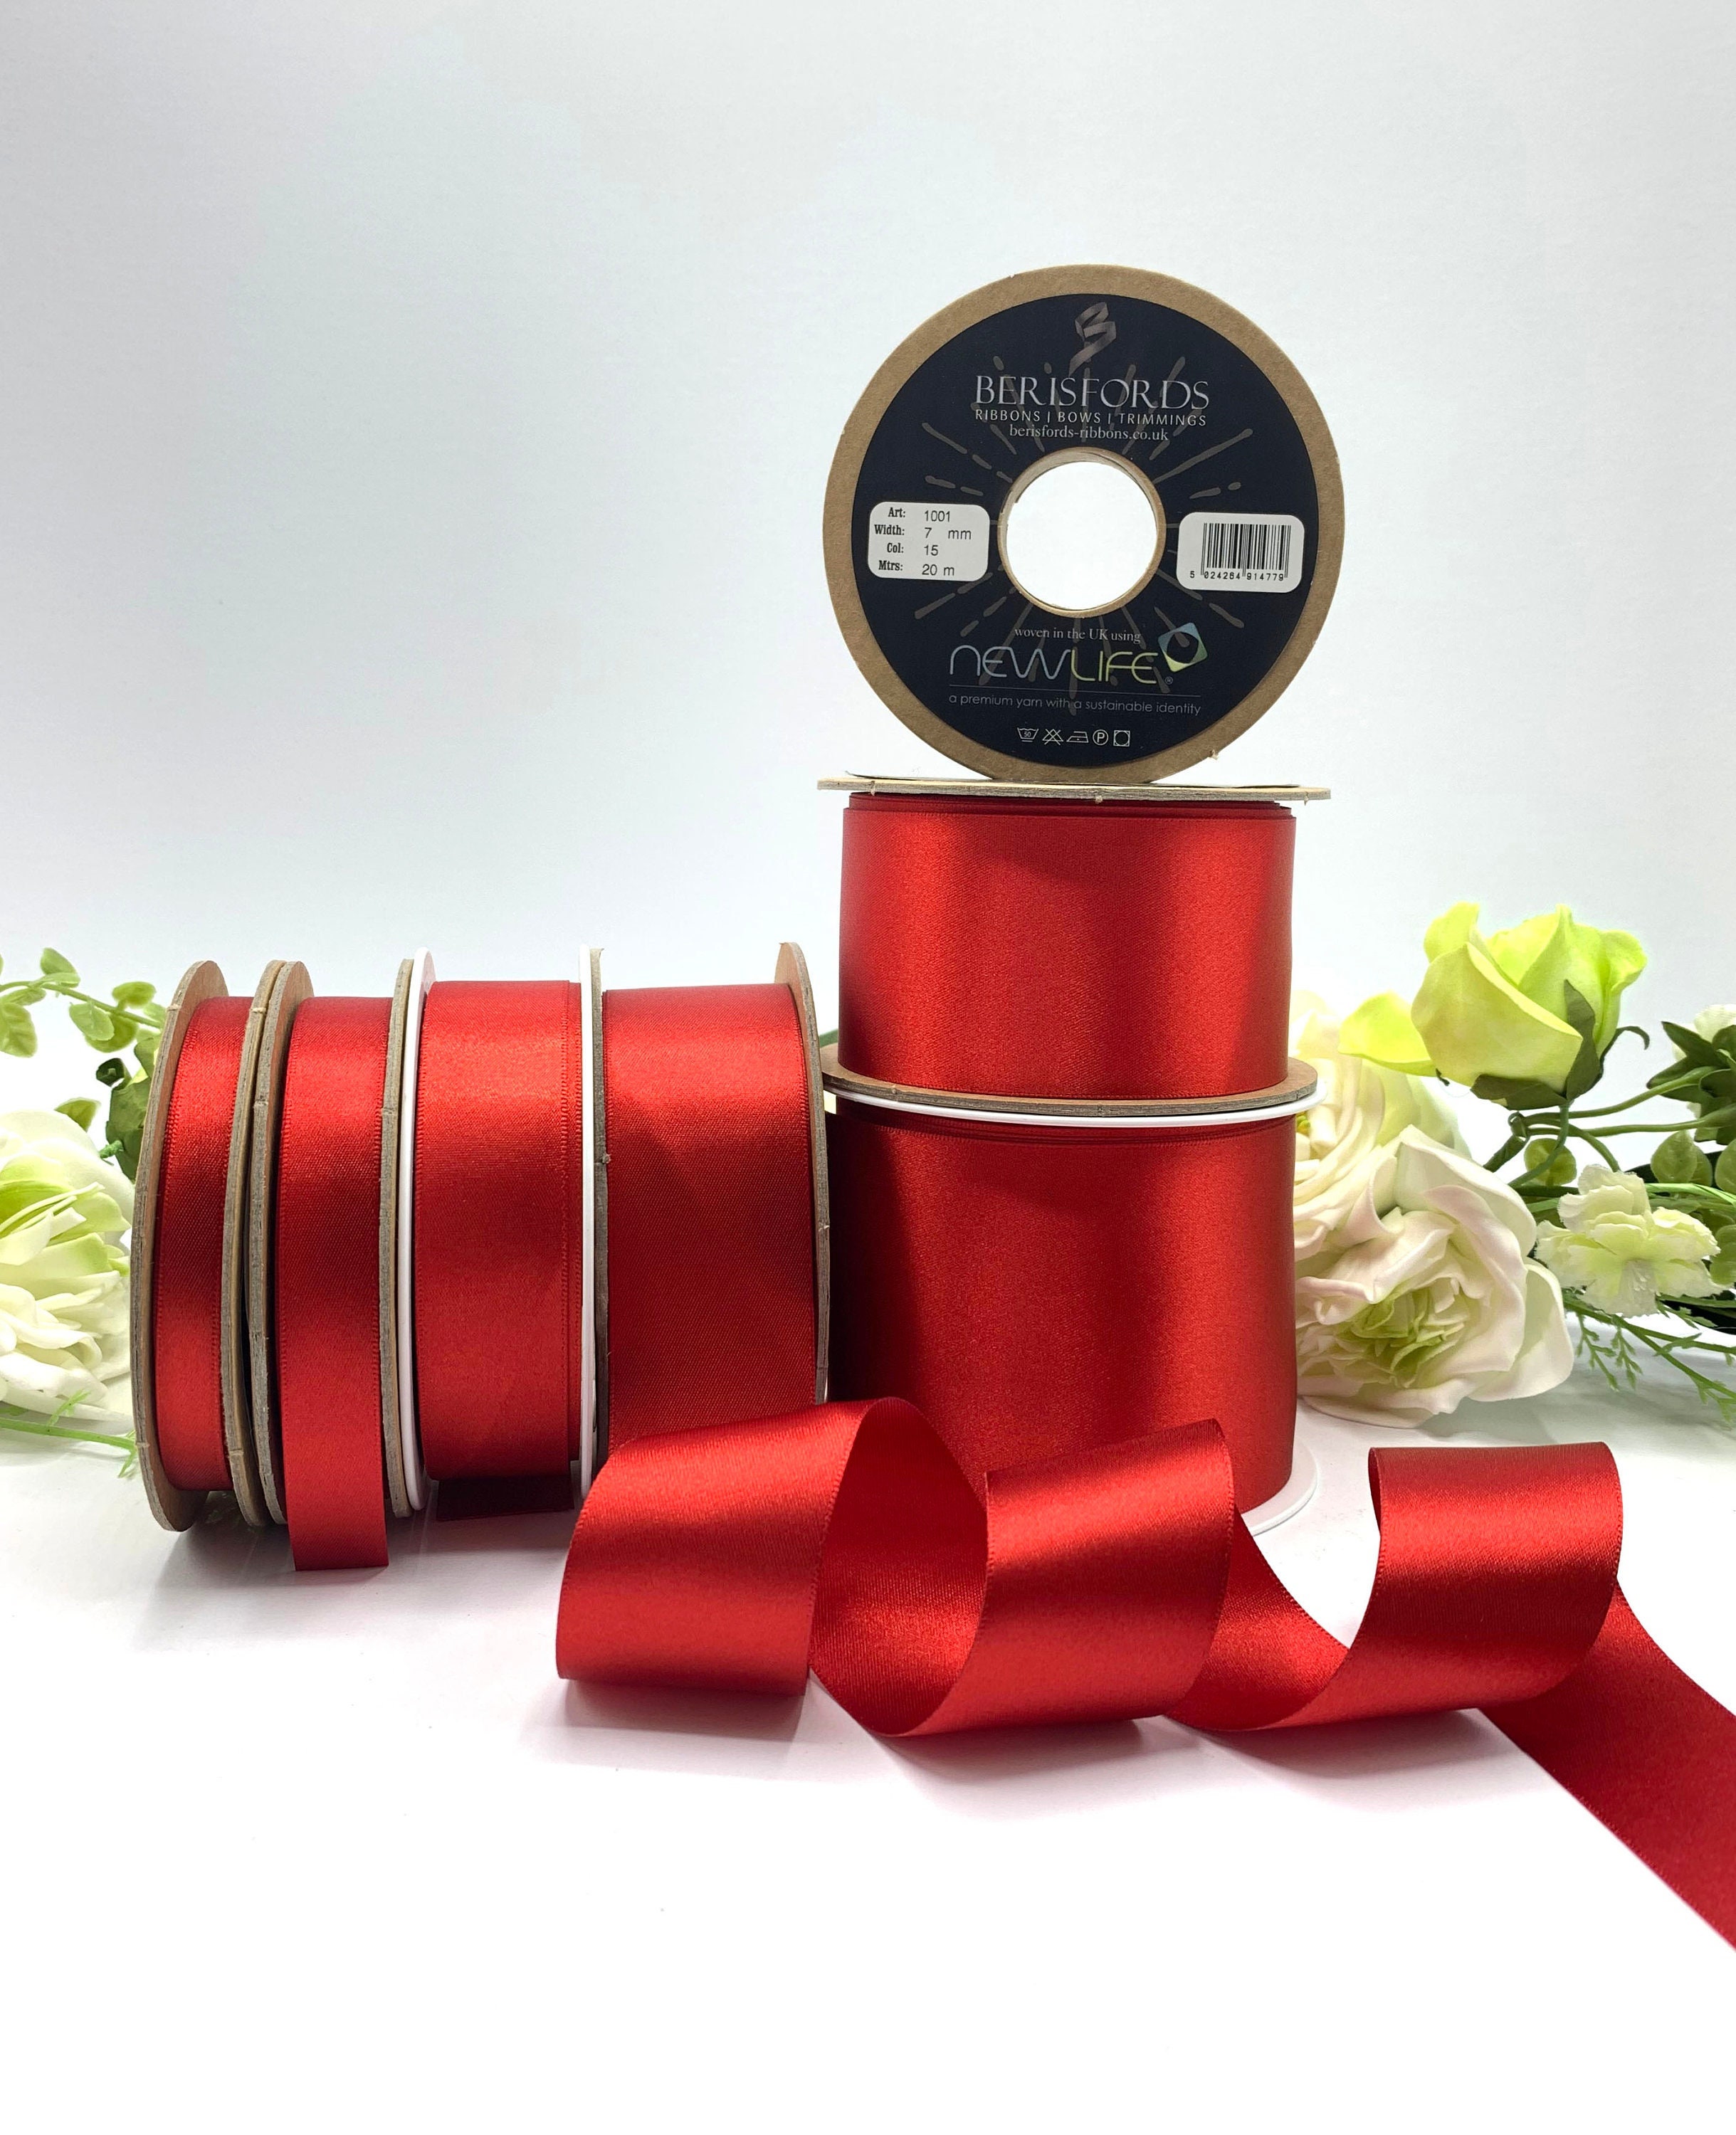 Red Silk Ribbon 1/4” wide BY THE YARD, Narrow Red Silk Ribbon